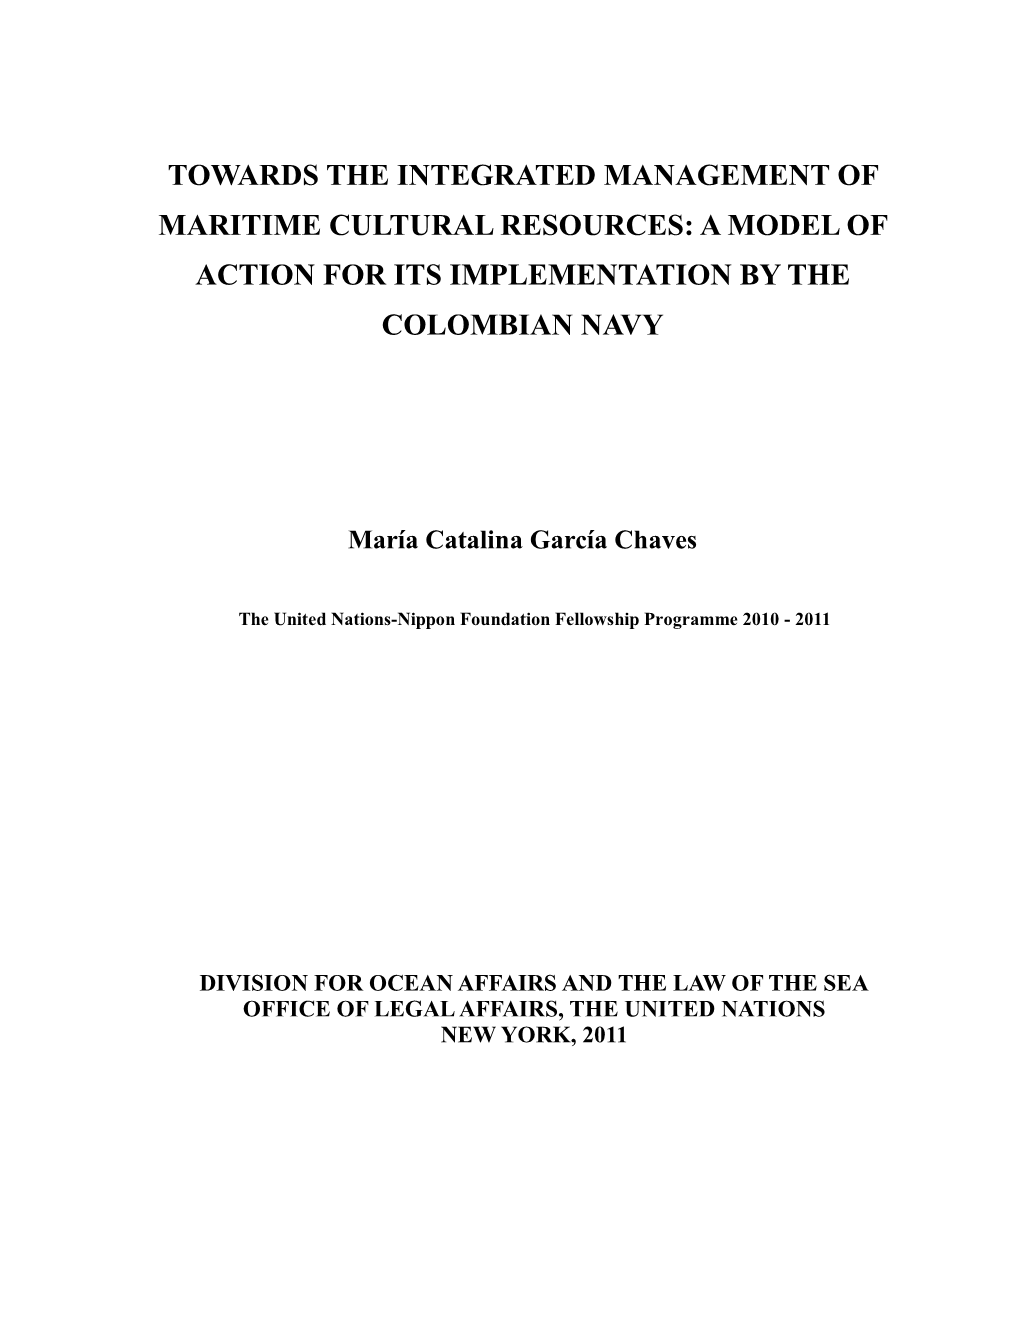 Towards the Integrated Management of Maritime Cultural Resources: a Model of Action for Its Implementation by the Colombian Navy